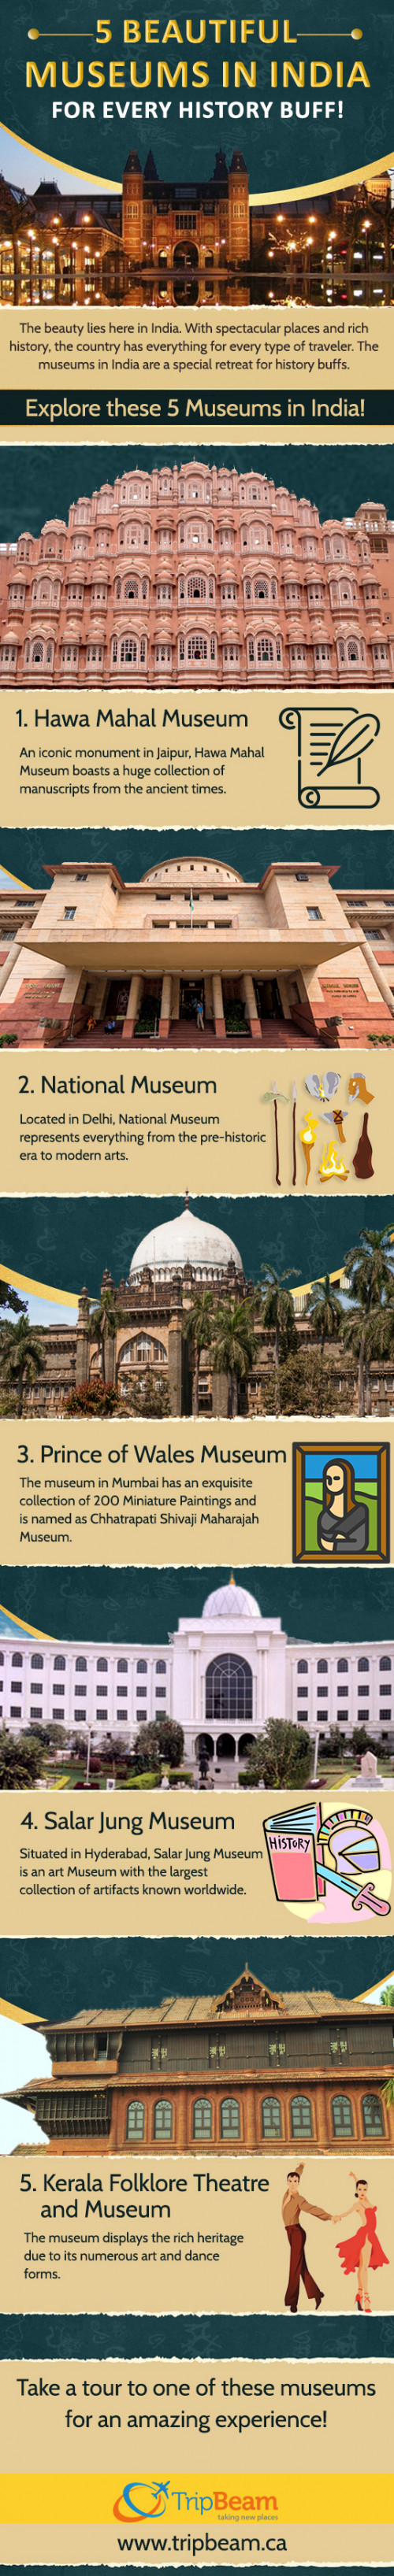 5-Beautiful-Museums-in-India-for-Every-History-Buff.jpg